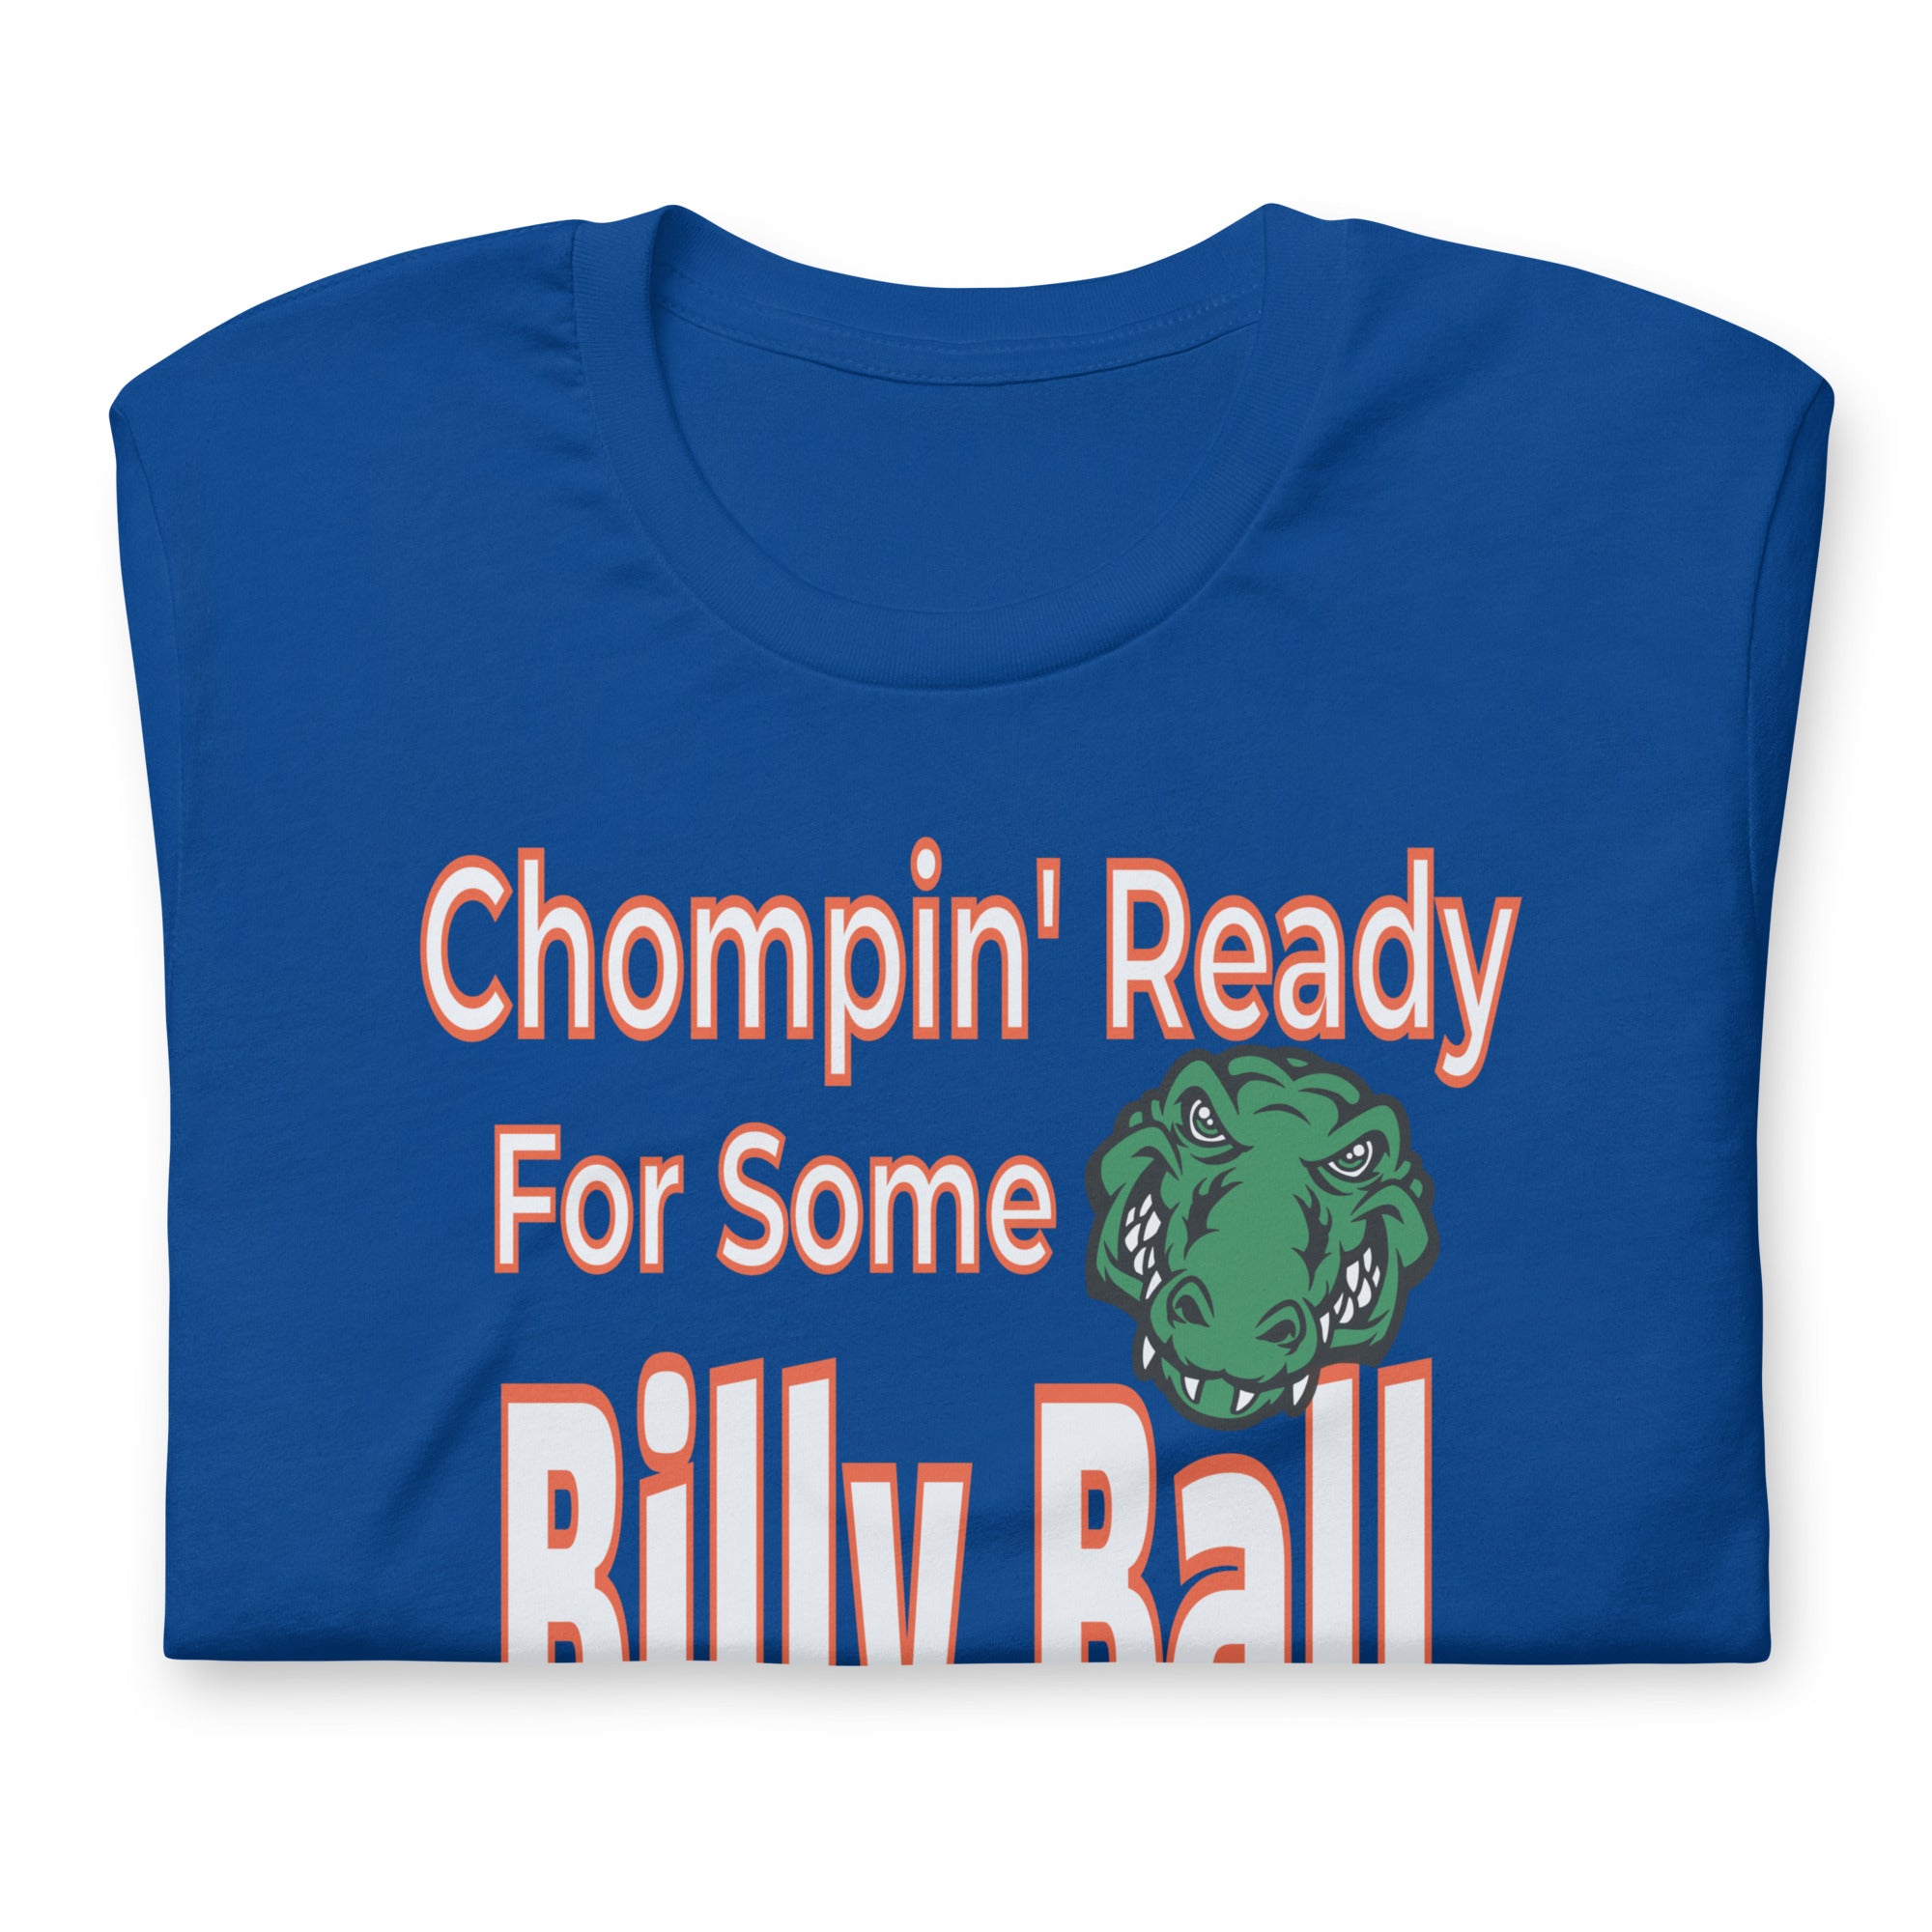 Florida Football Fans T-Shirt Saying They're Ready to Play Billy Ball